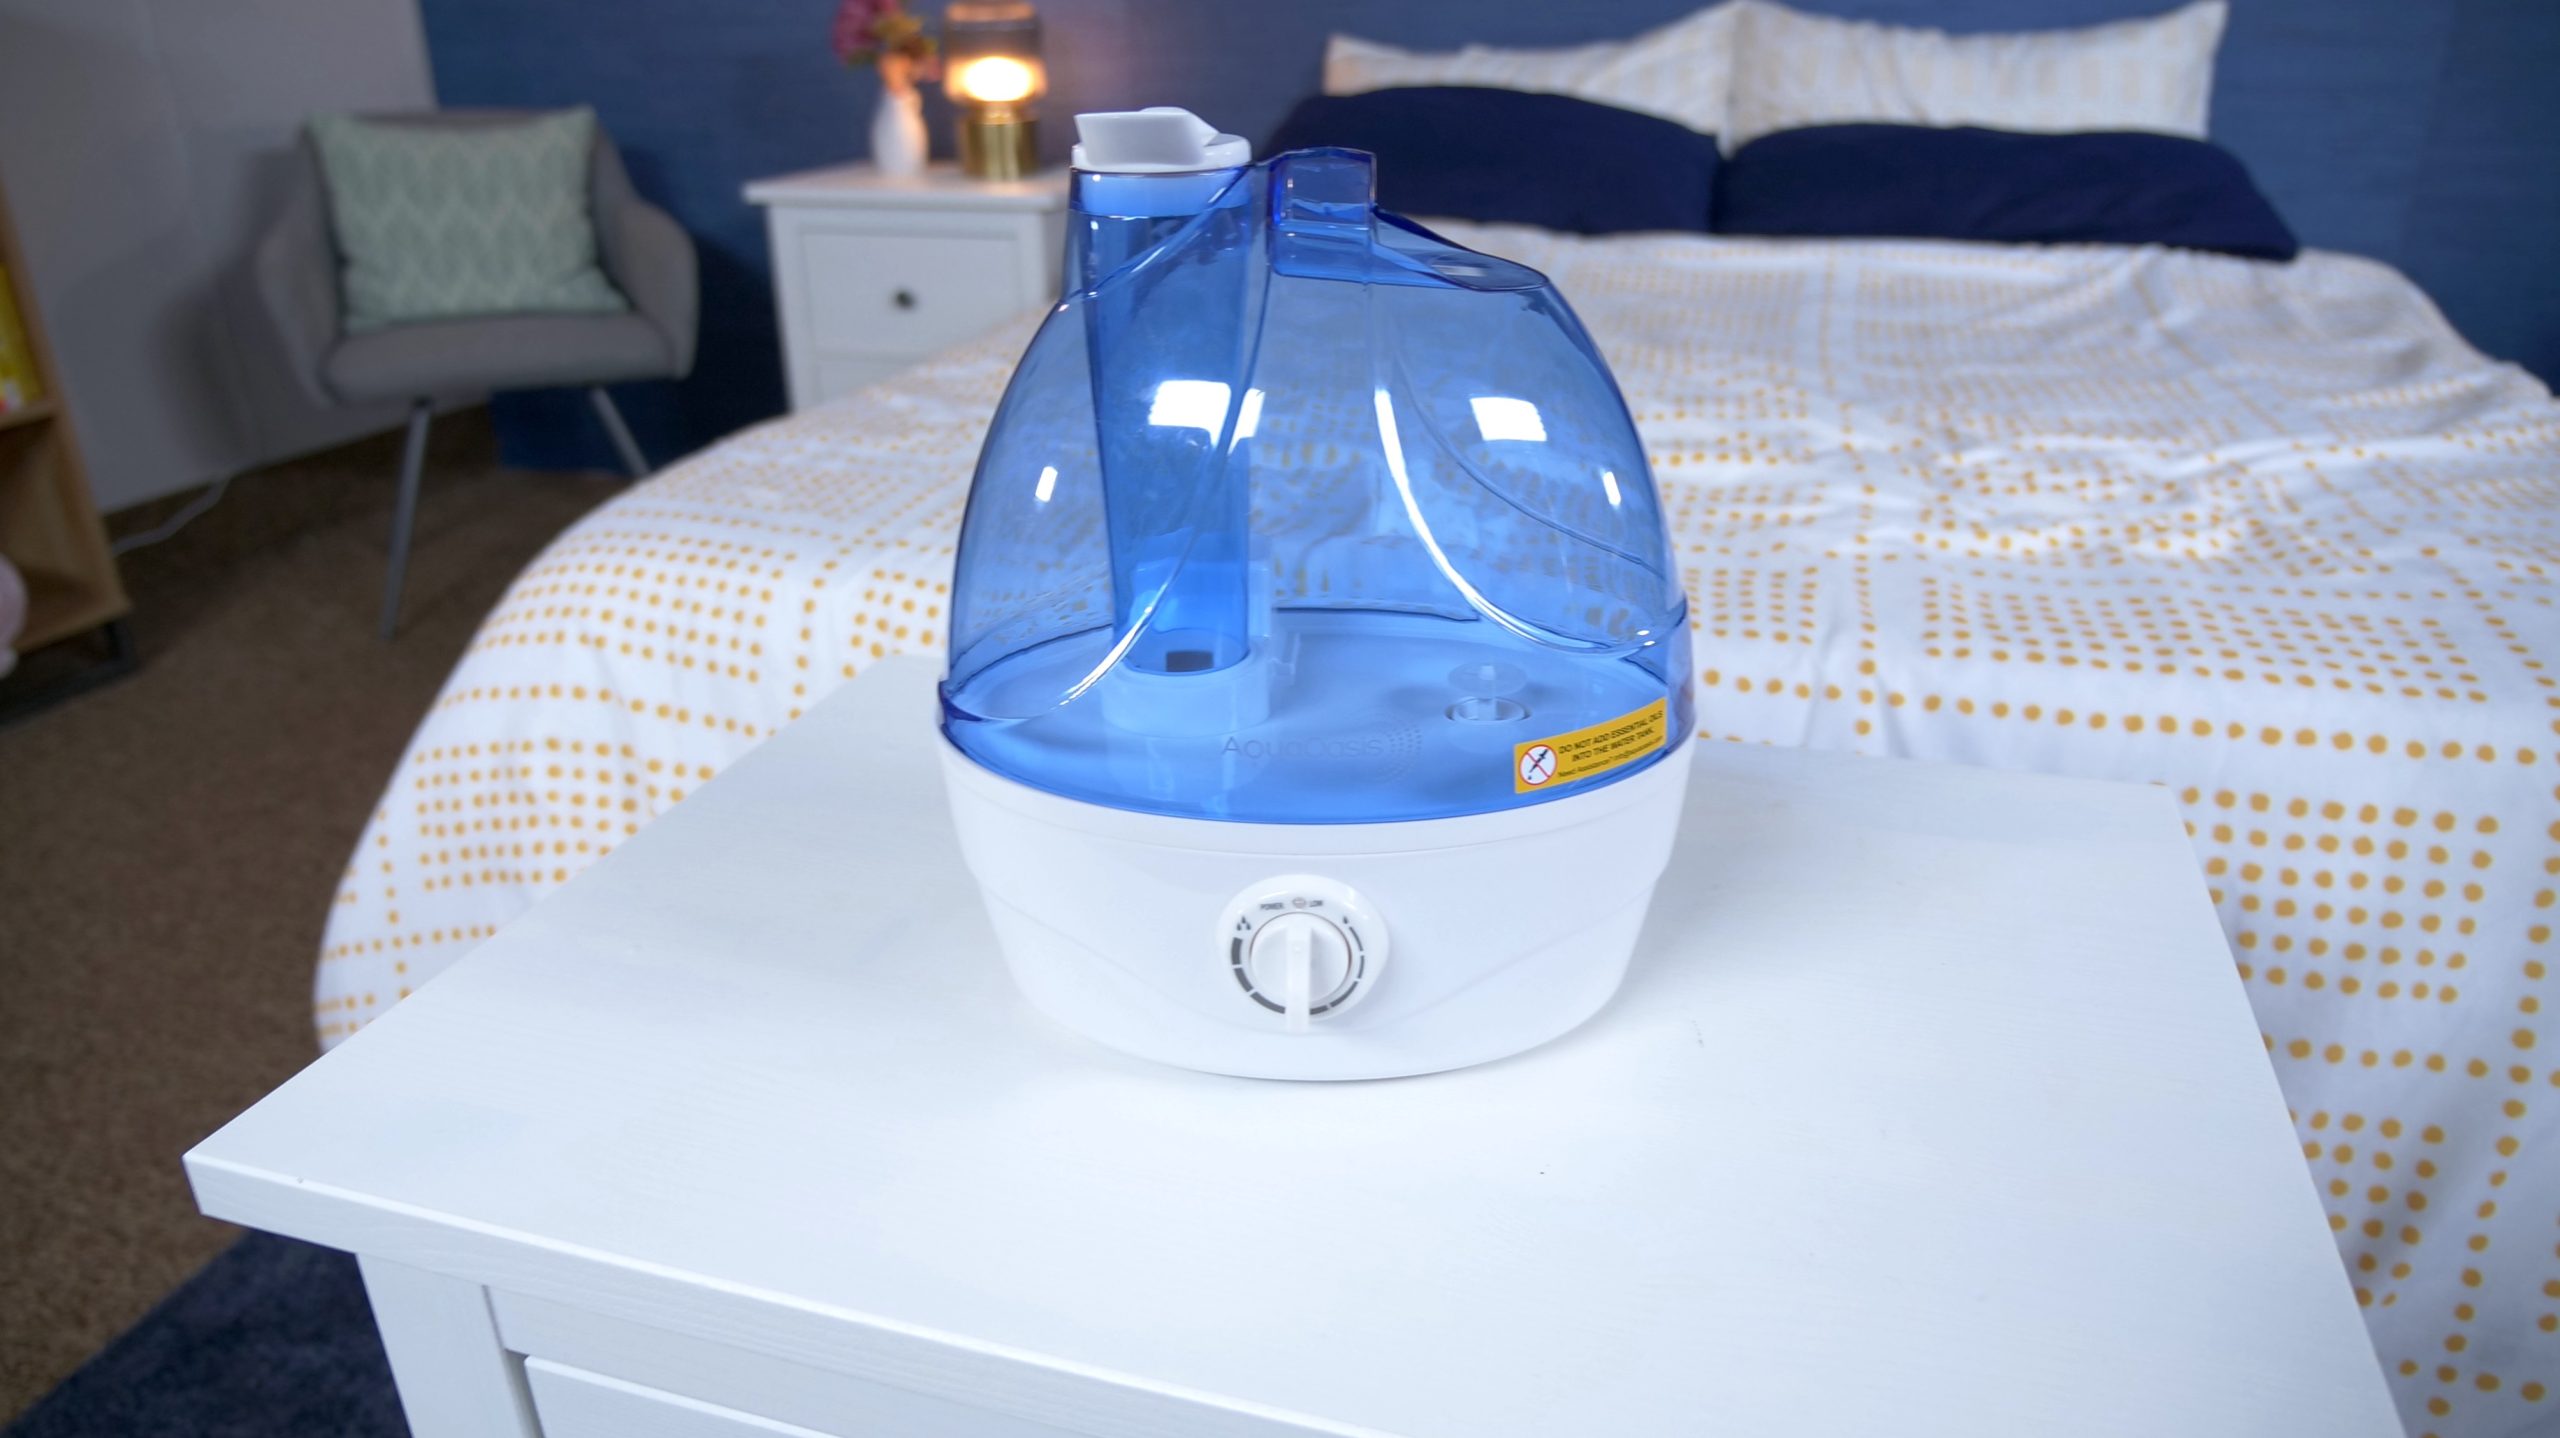 AquaOasis Cool Mist Humidifier Review